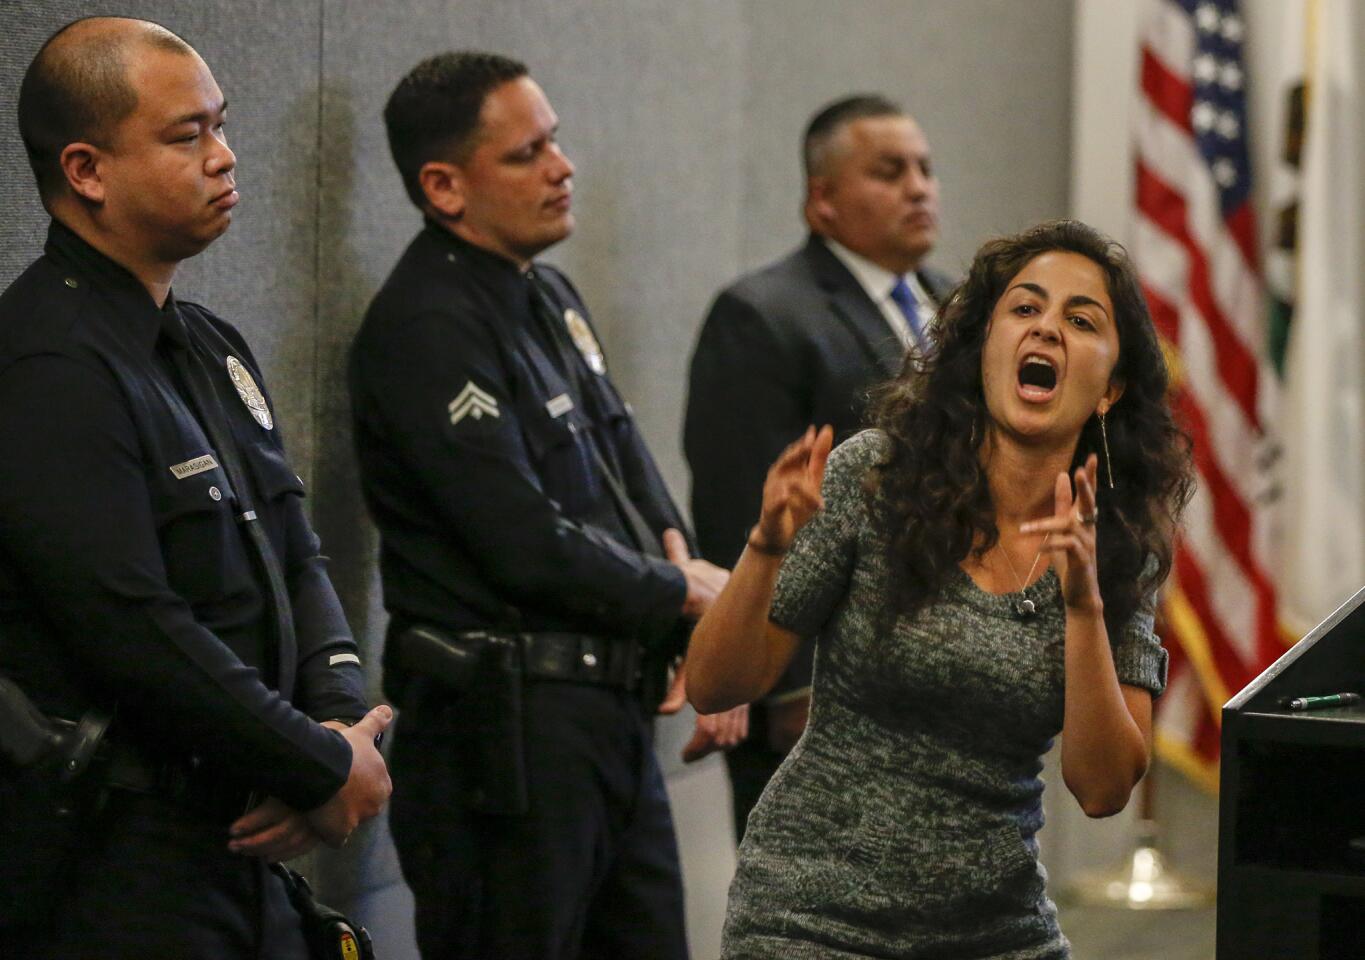 Mariella Saba gestures near several officers during her two minutes of public comment before the vote by the Los Angeles Police Commission to adopt new LAPD rules for use of deadly force.